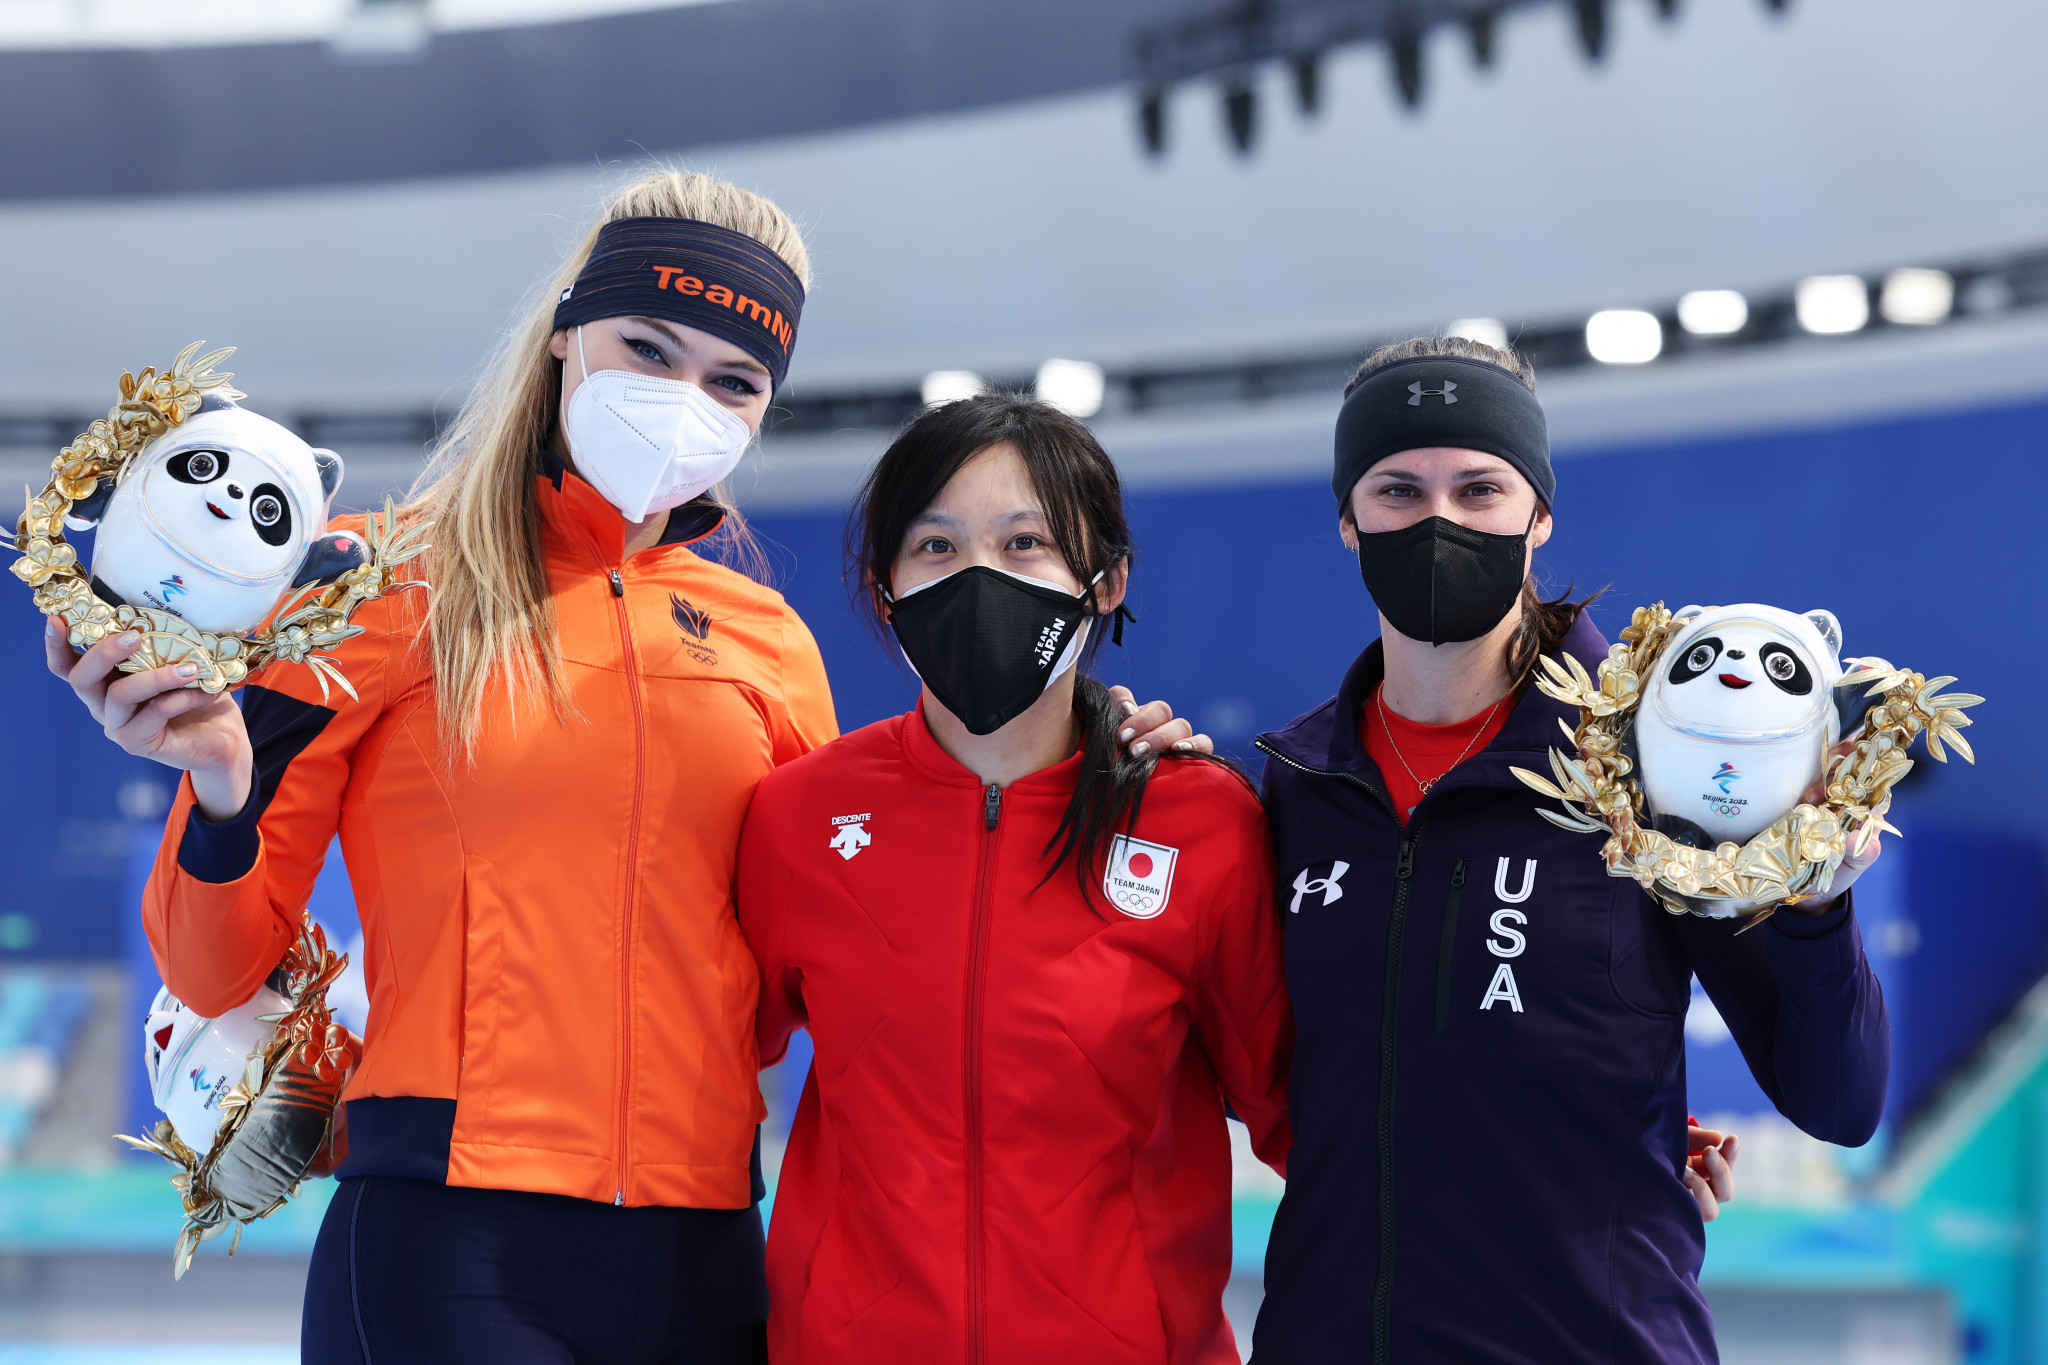 Maho Takagi flanked by Jutta Leerdam (left) and Brittany Bowe, is only the second Japanese woman to win two Olympic golds after her sister Nana © Getty Images